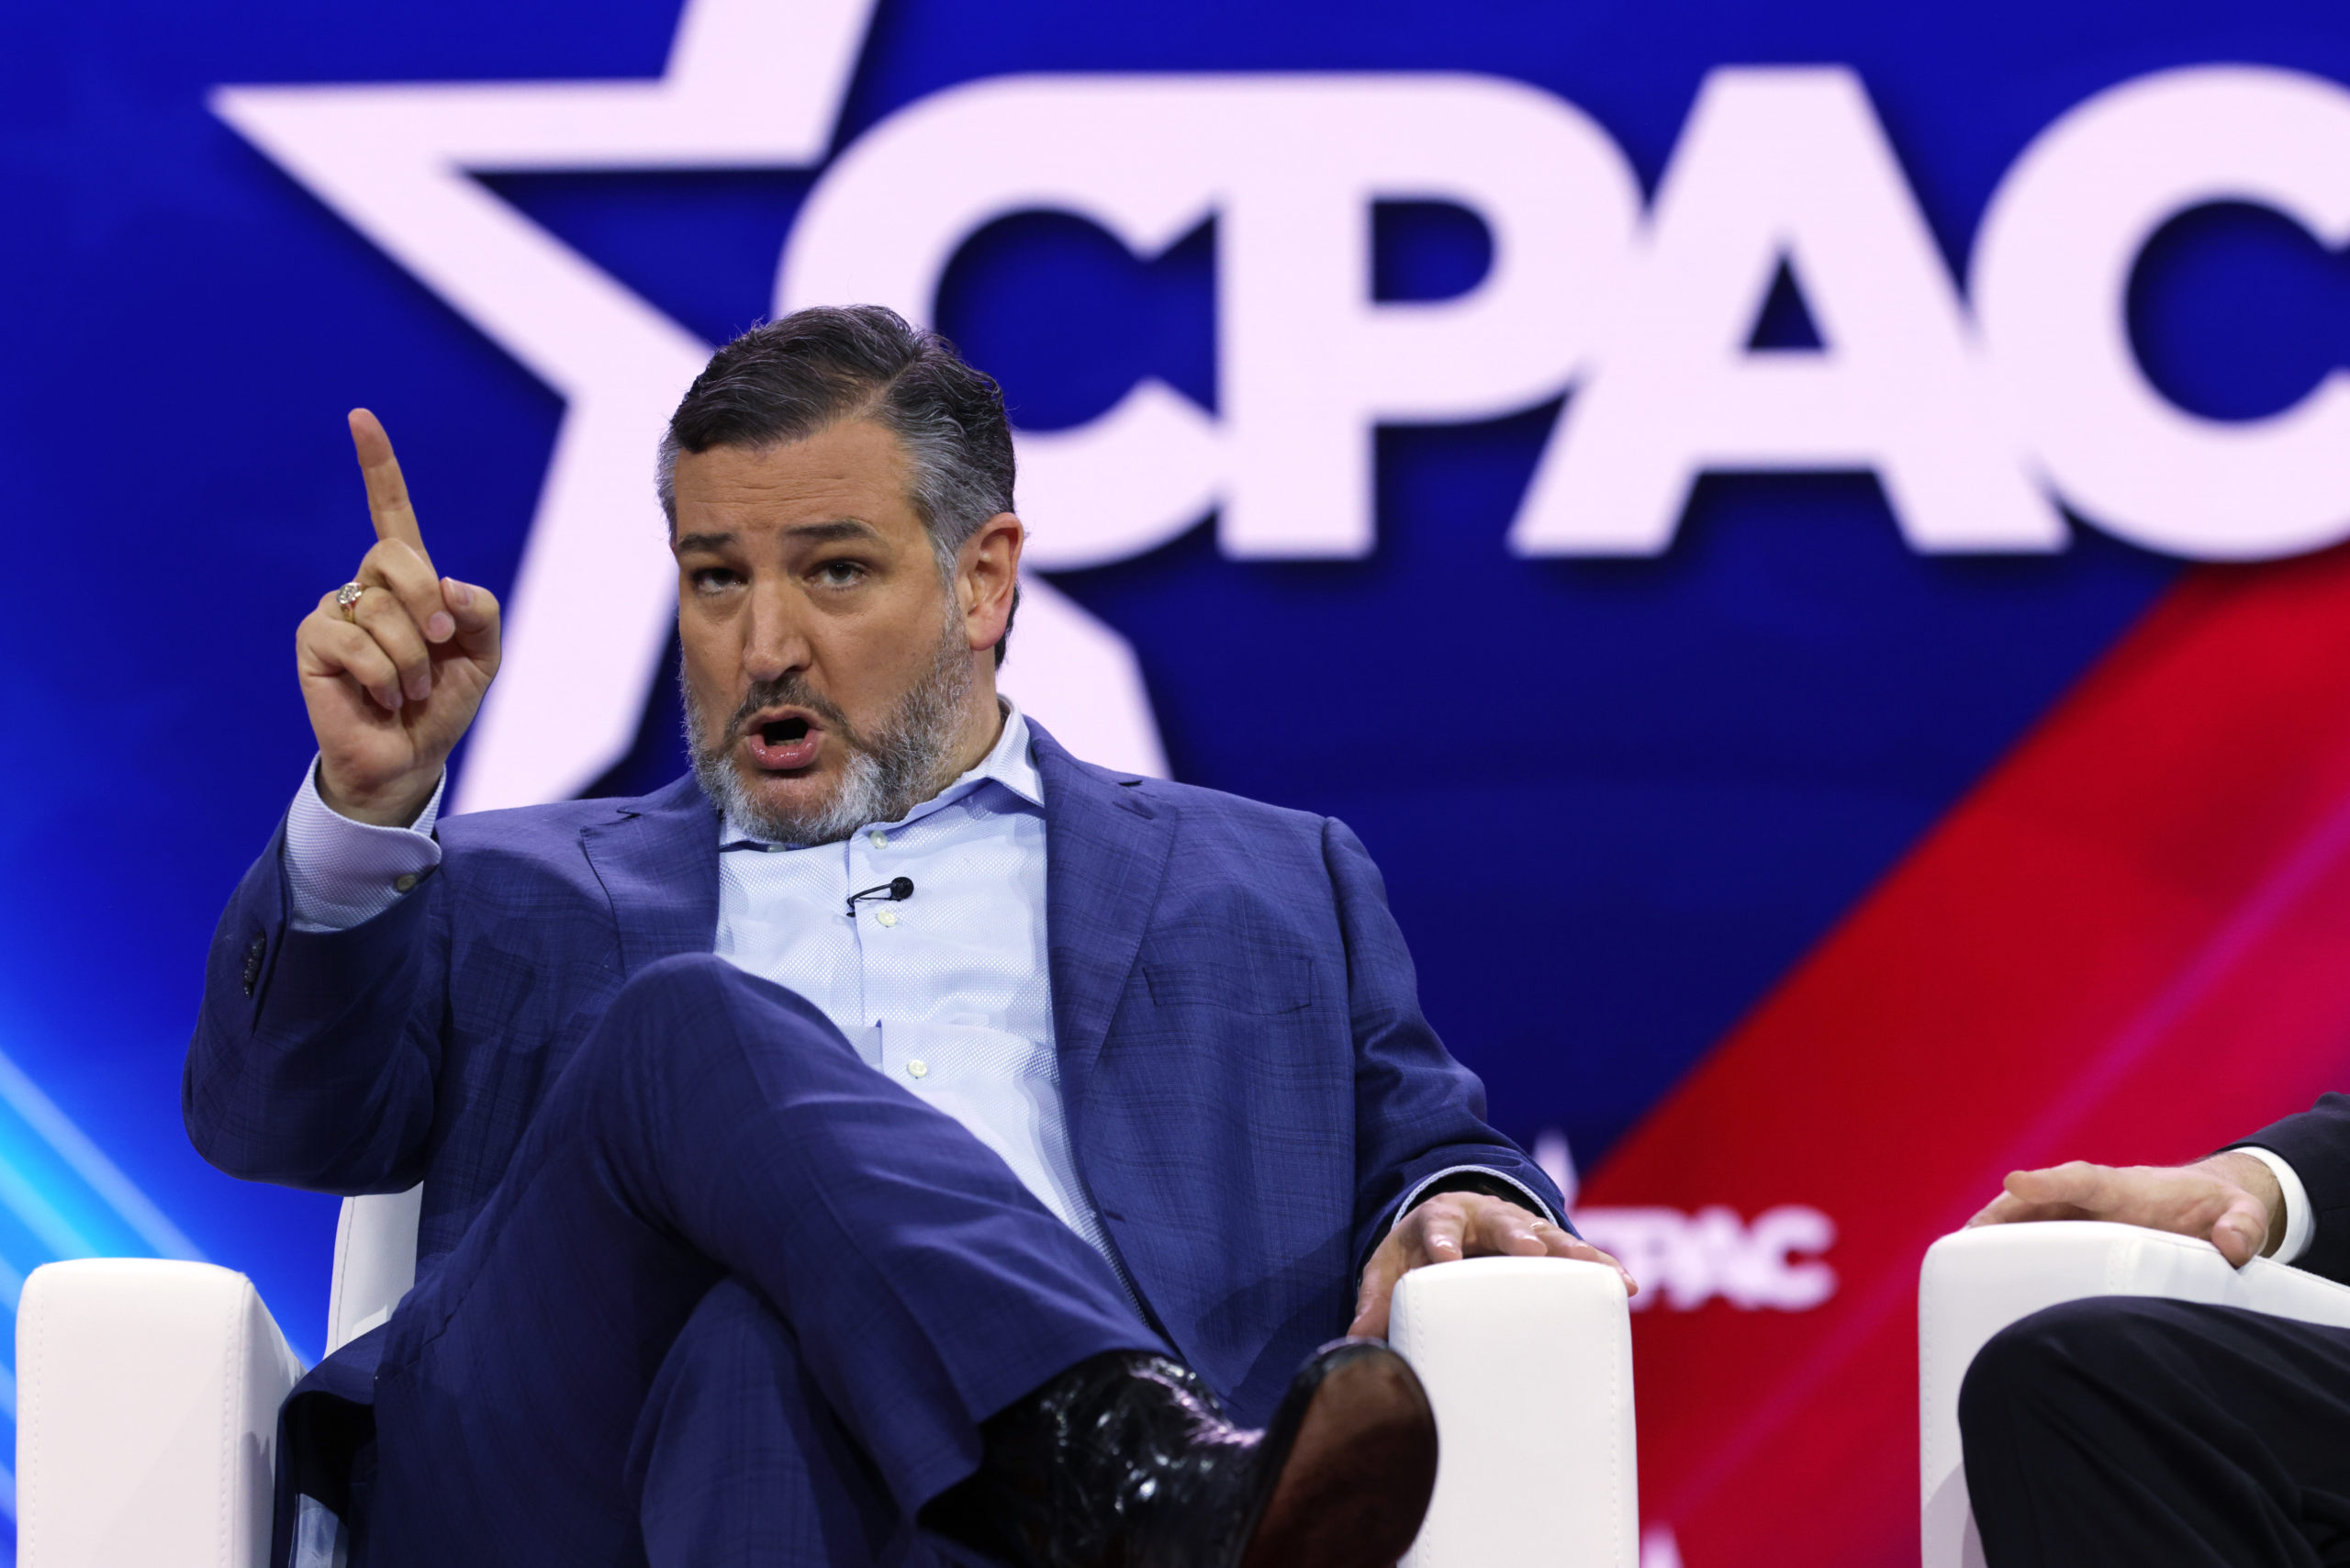 NATIONAL HARBOR, MARYLAND - MARCH 02: U.S. Sen. Ted Cruz (R-TX) speaks during the annual Conservative Political Action Conference (CPAC) at Gaylord National Resort & Convention Center on March 2, 2023 in National Harbor, Maryland. The annual conservative conference kicks off today with former President Donald Trump addressing the event on Saturday. (Photo by Alex Wong/Getty Images)